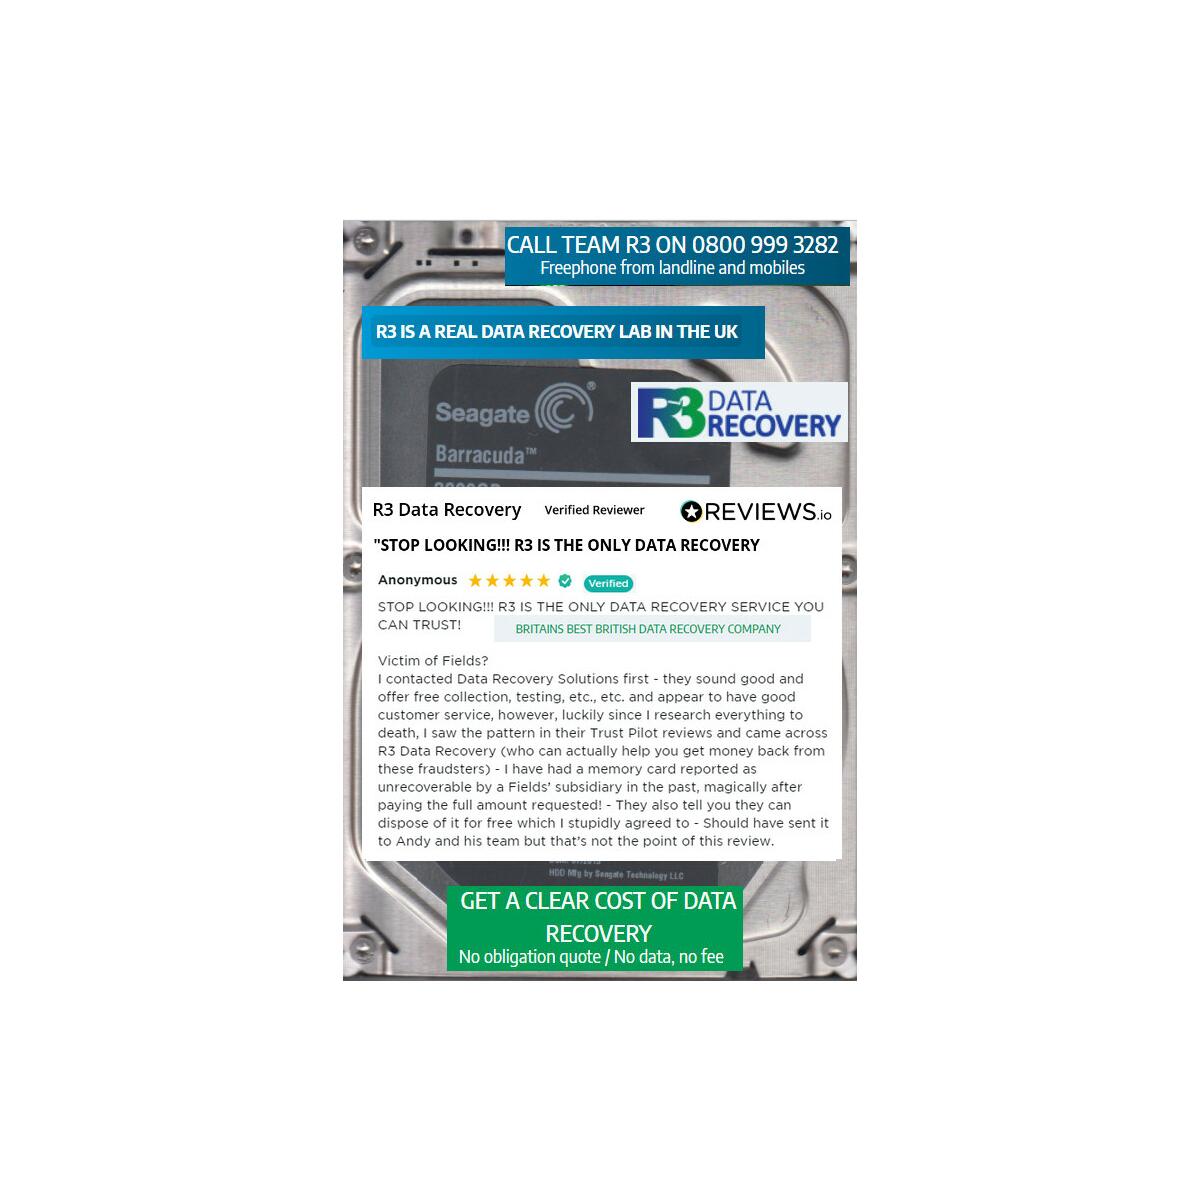 R3 Data Recovery 5 star review on 16th January 2022